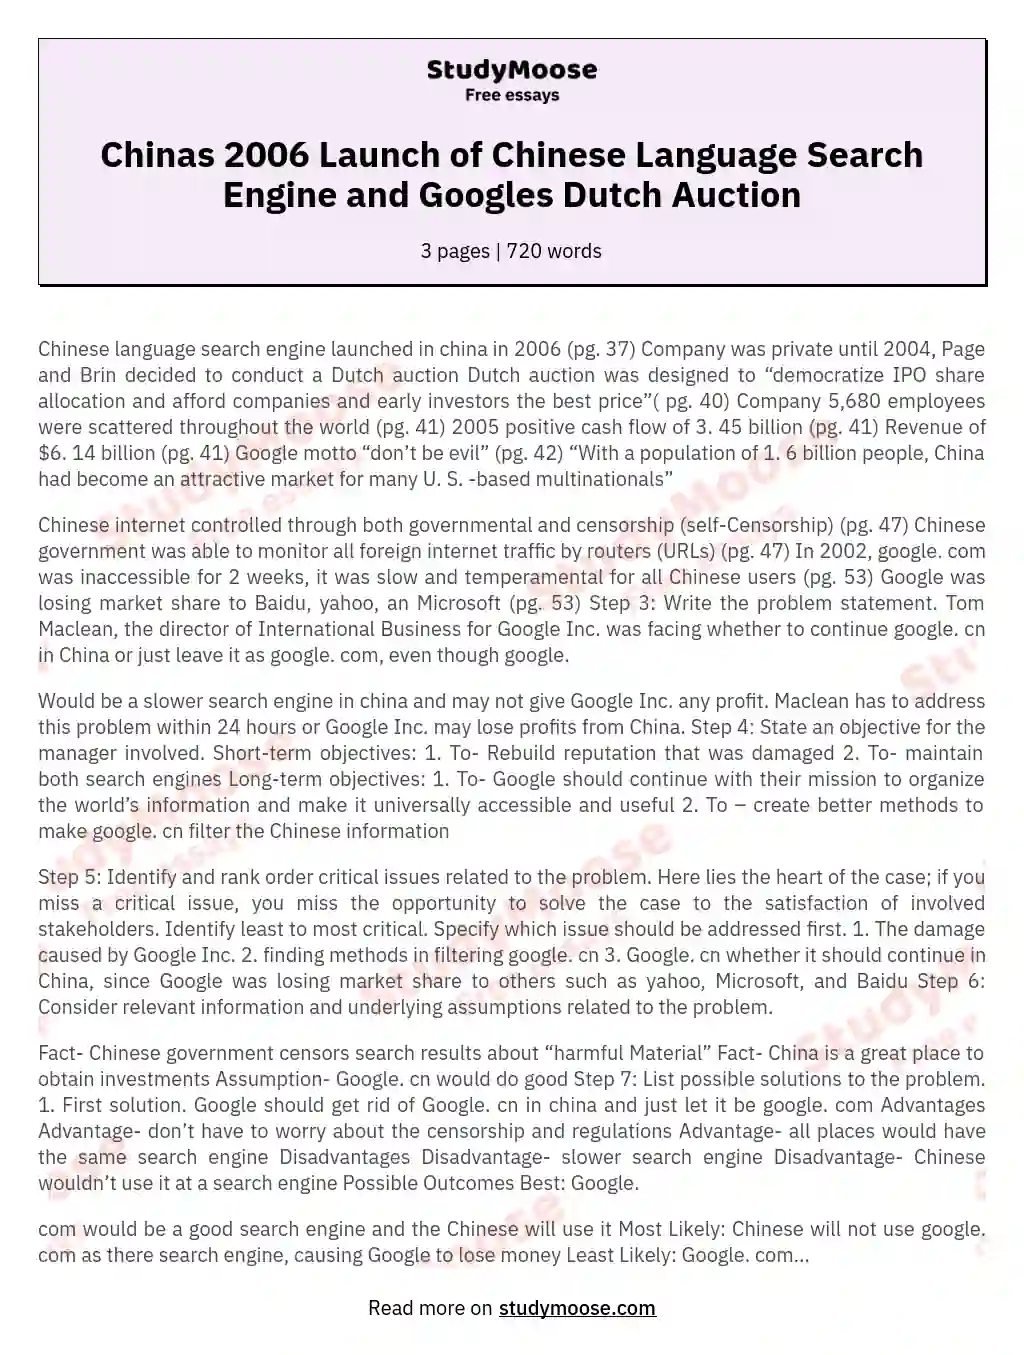 Chinas 2006 Launch of Chinese Language Search Engine and Googles Dutch Auction essay